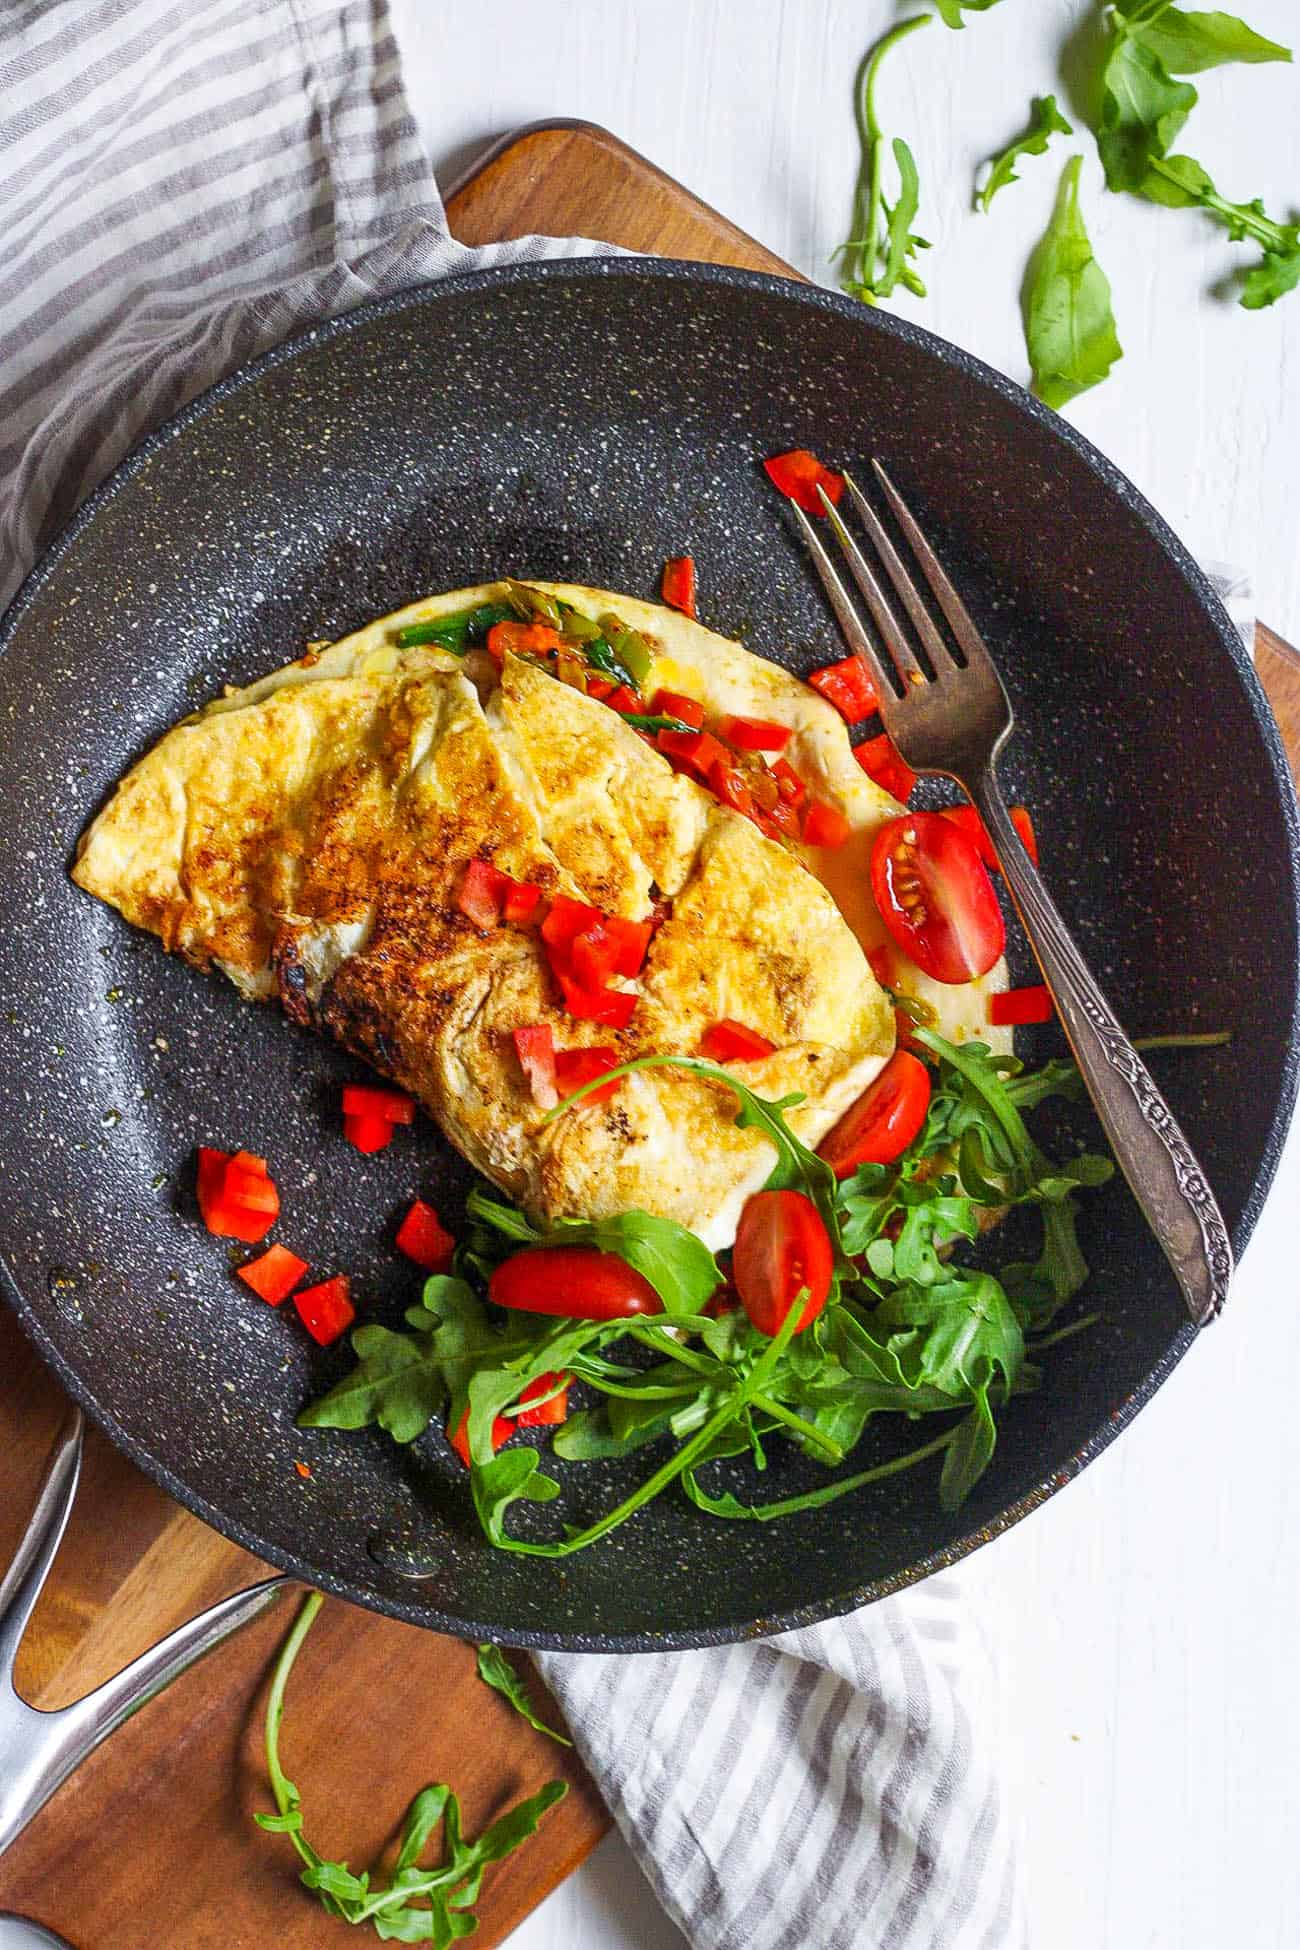 low calorie omelette with indian spices and veggies served on a black plate - healthy omelette